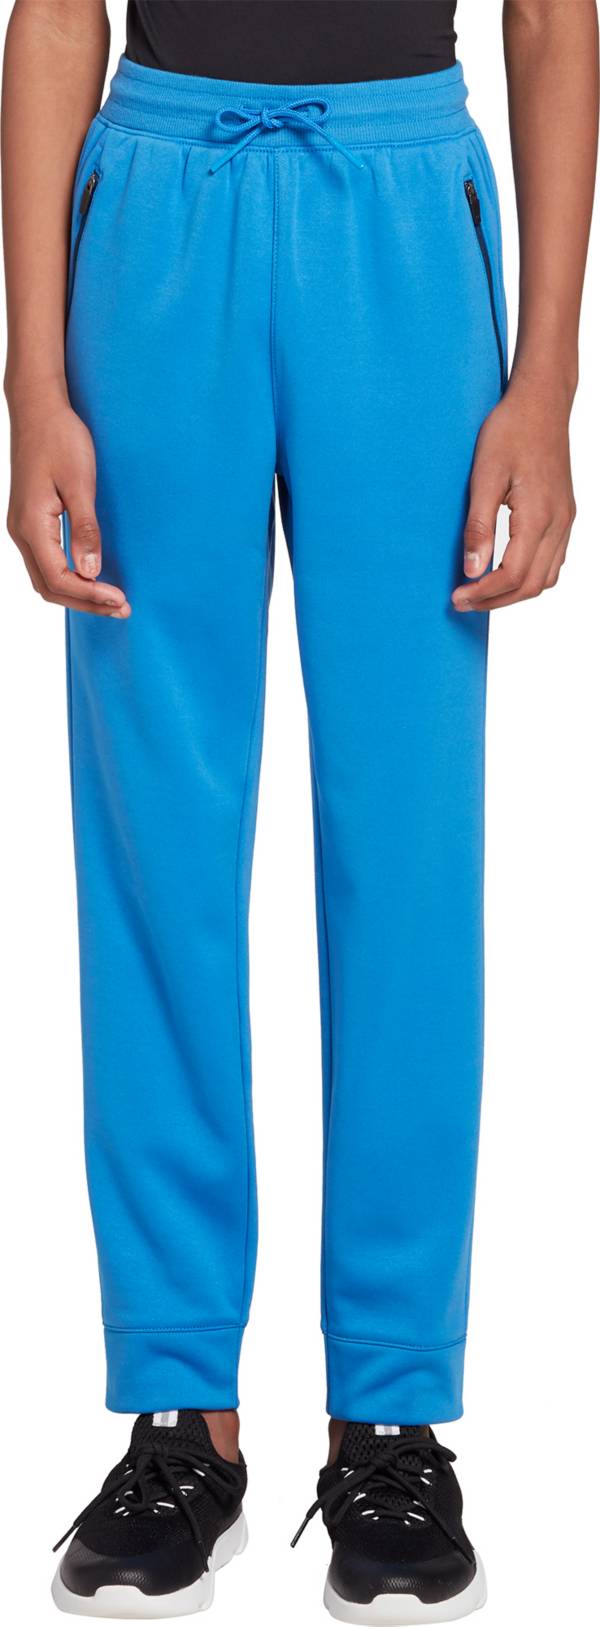 DSG Boys' Tech Tapered Pants product image